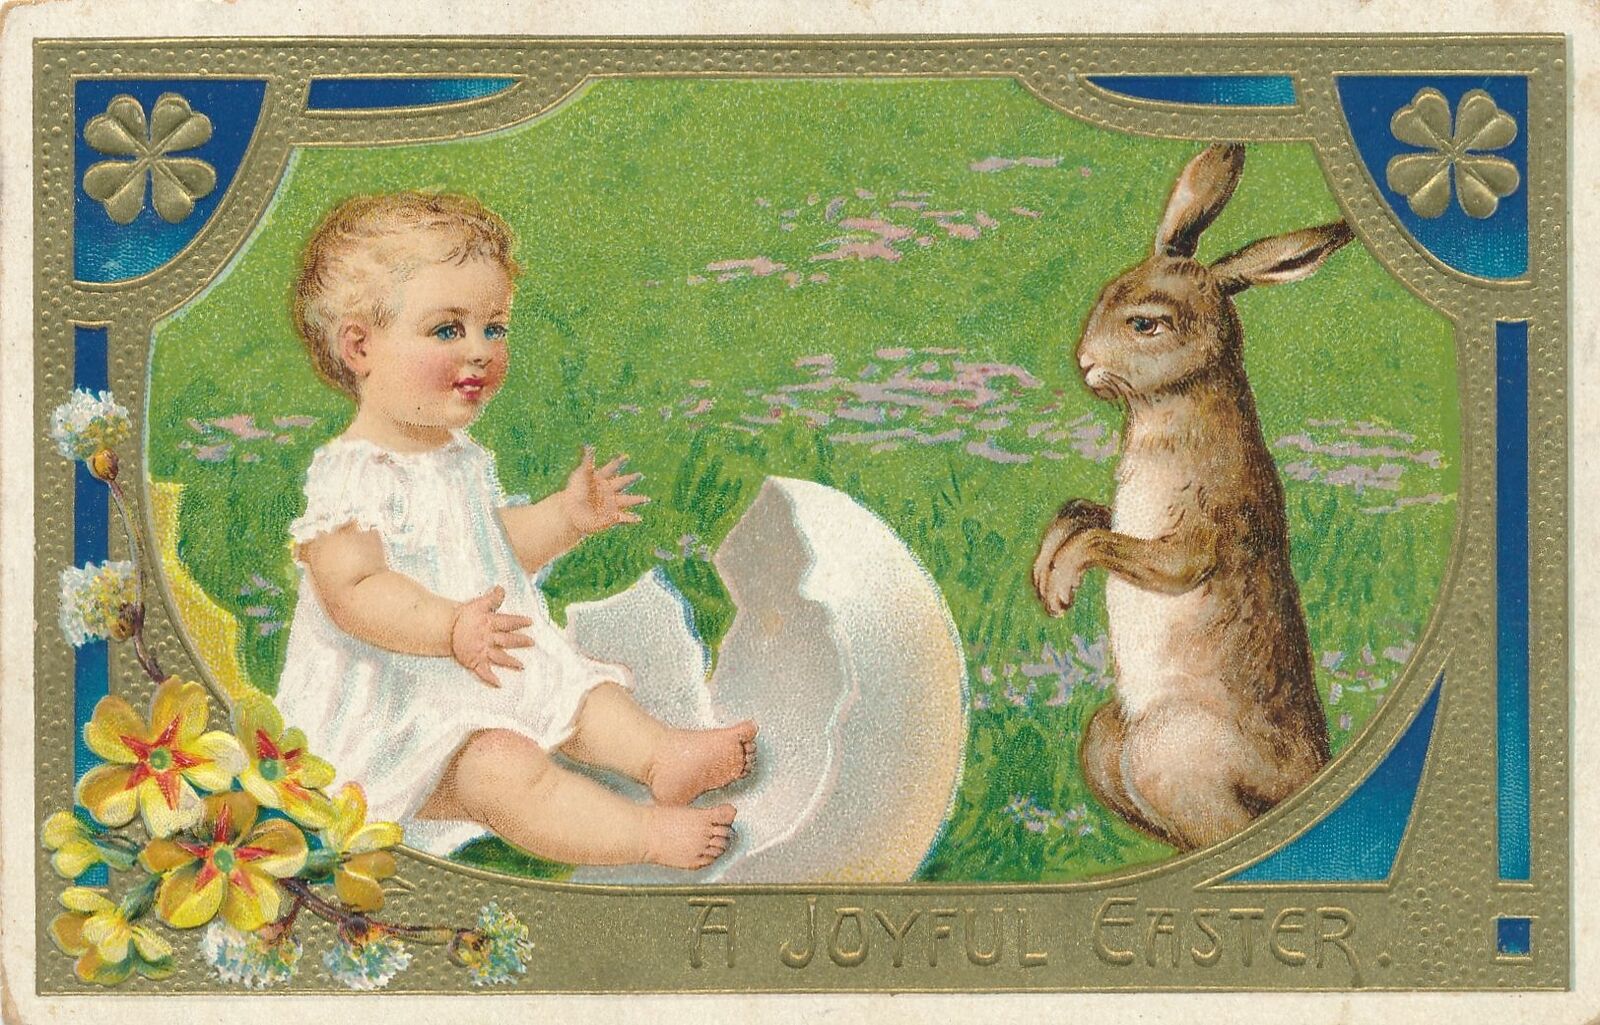 EASTER - Rabbit Looking At Baby In Egg A Joyful Easter Postcard - 1911